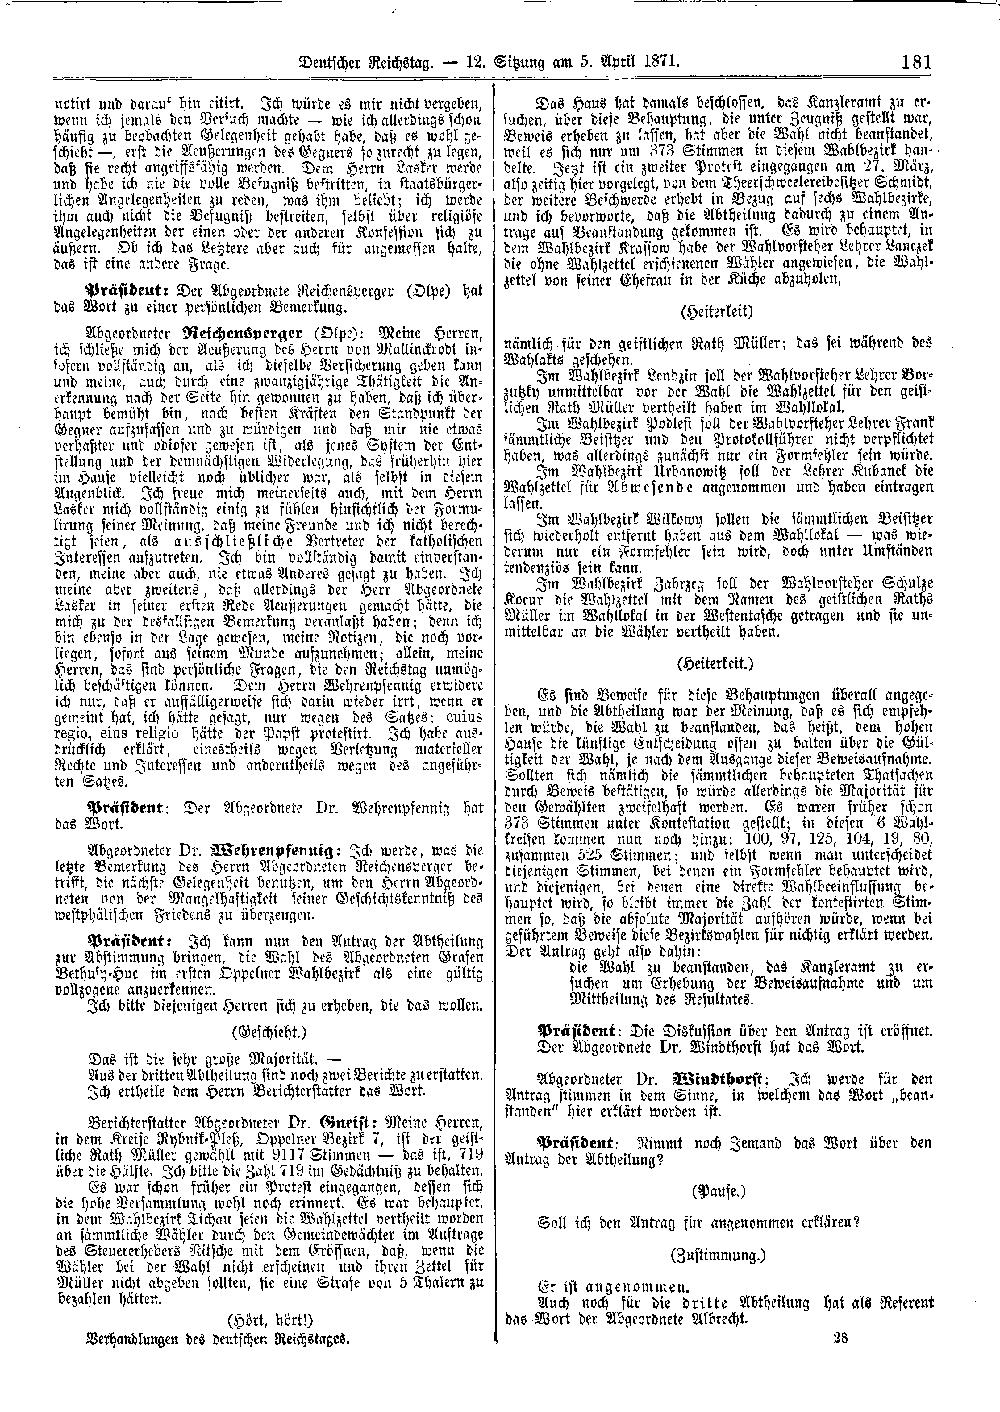 Scan of page 181